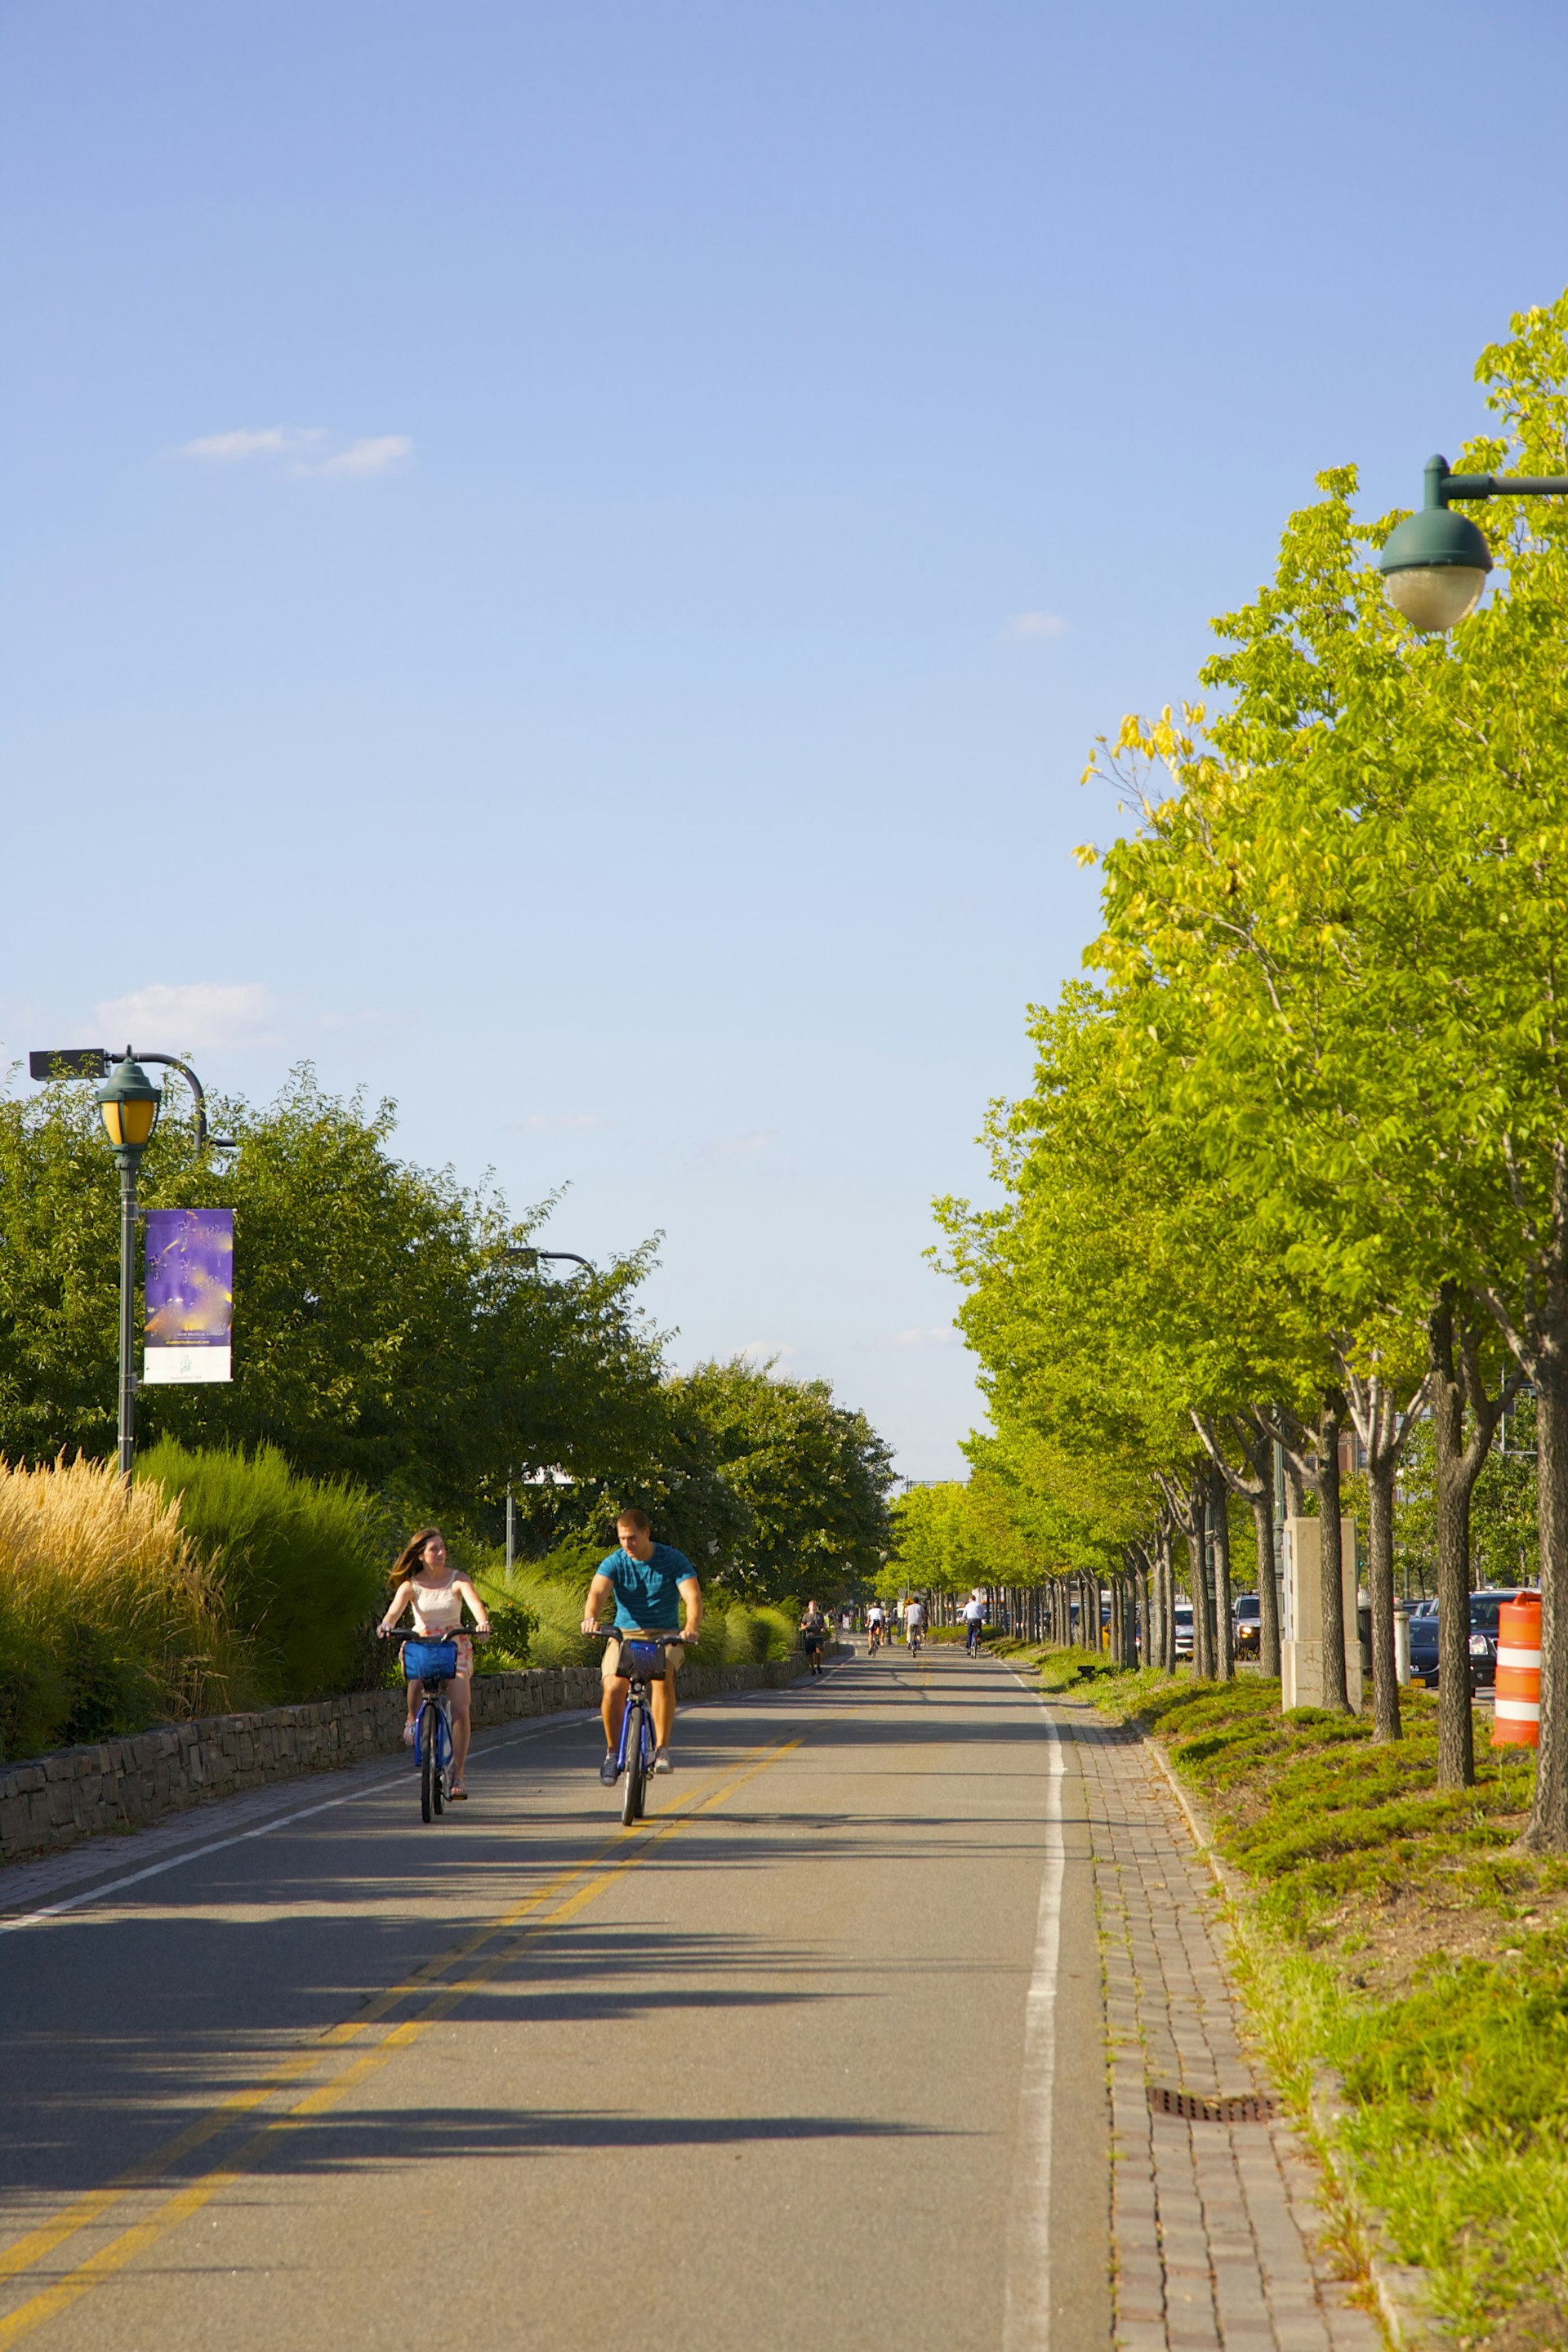 Bicyclists heading south on path between trees on Hudson River Park, Lower Manhattan, New York, USA.